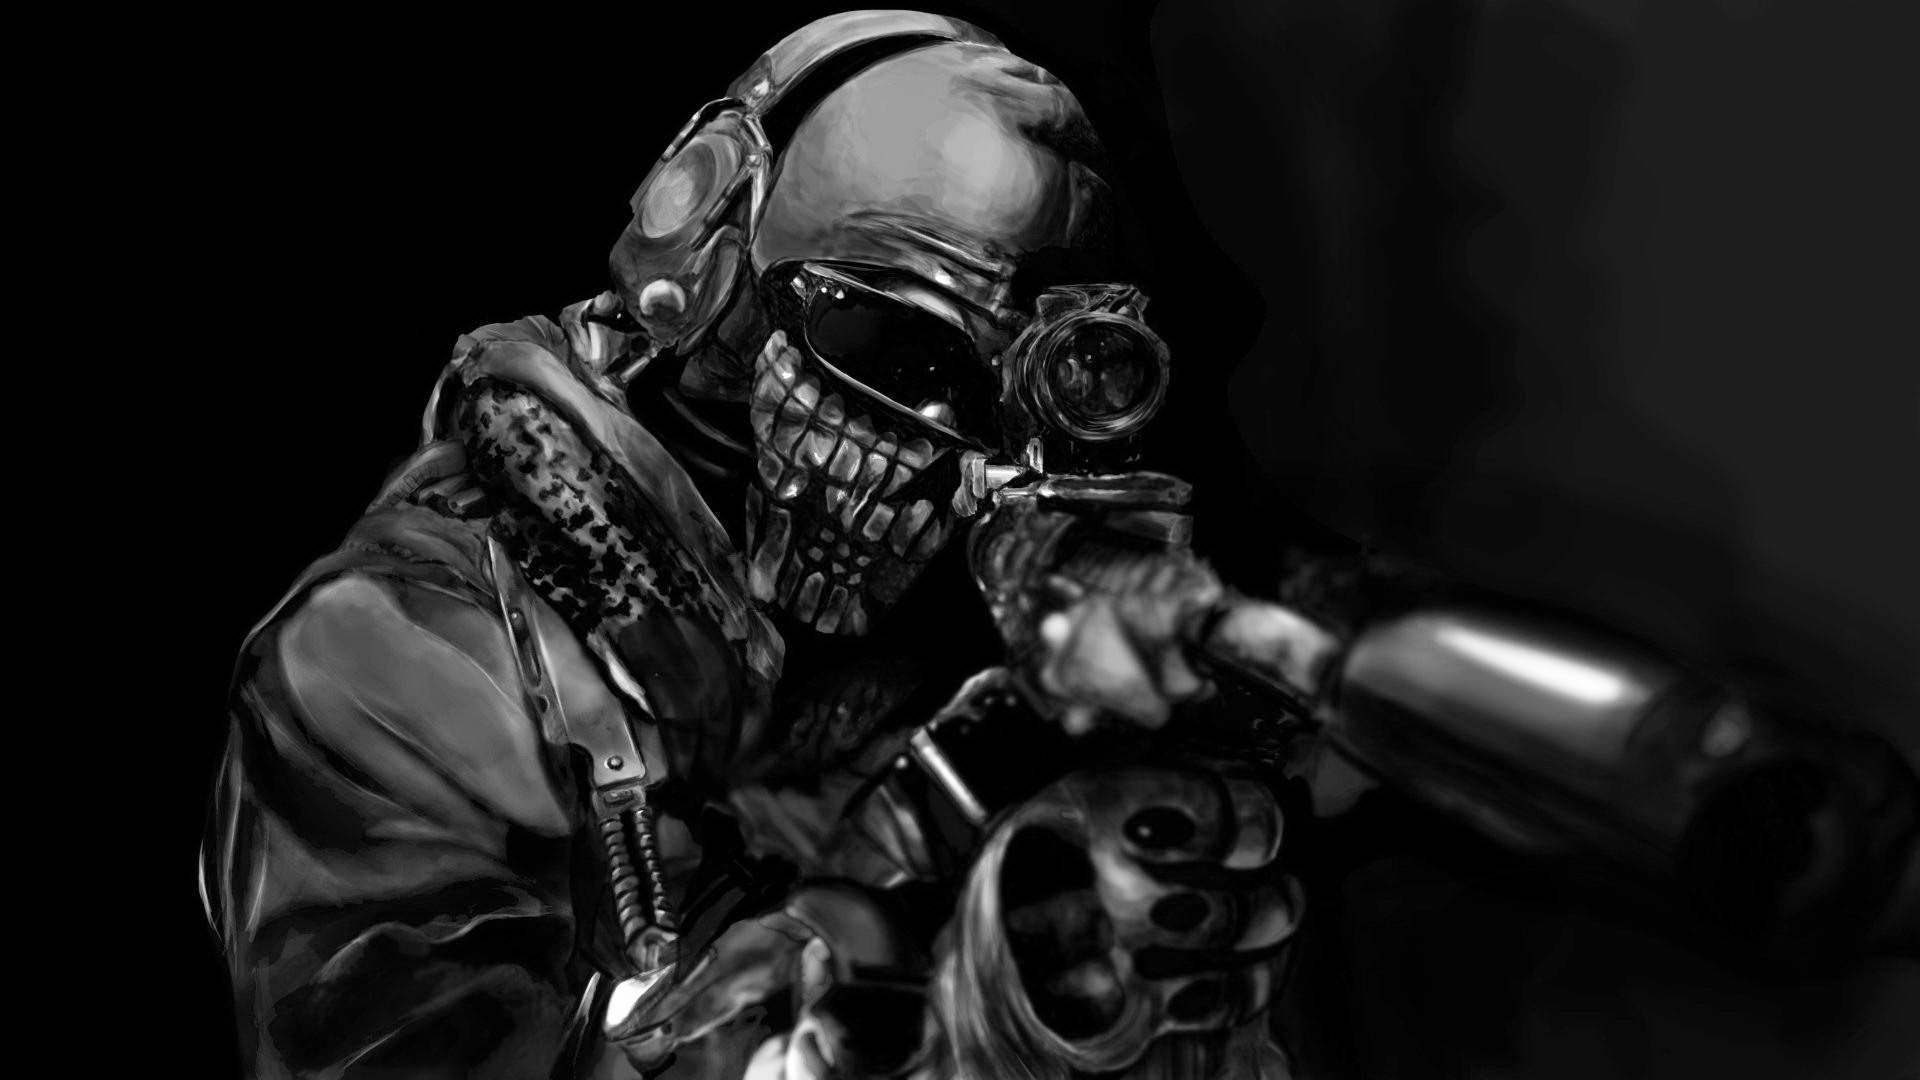 Can Install Your New Call Of Duty Ghosts Wallpaper On Puter